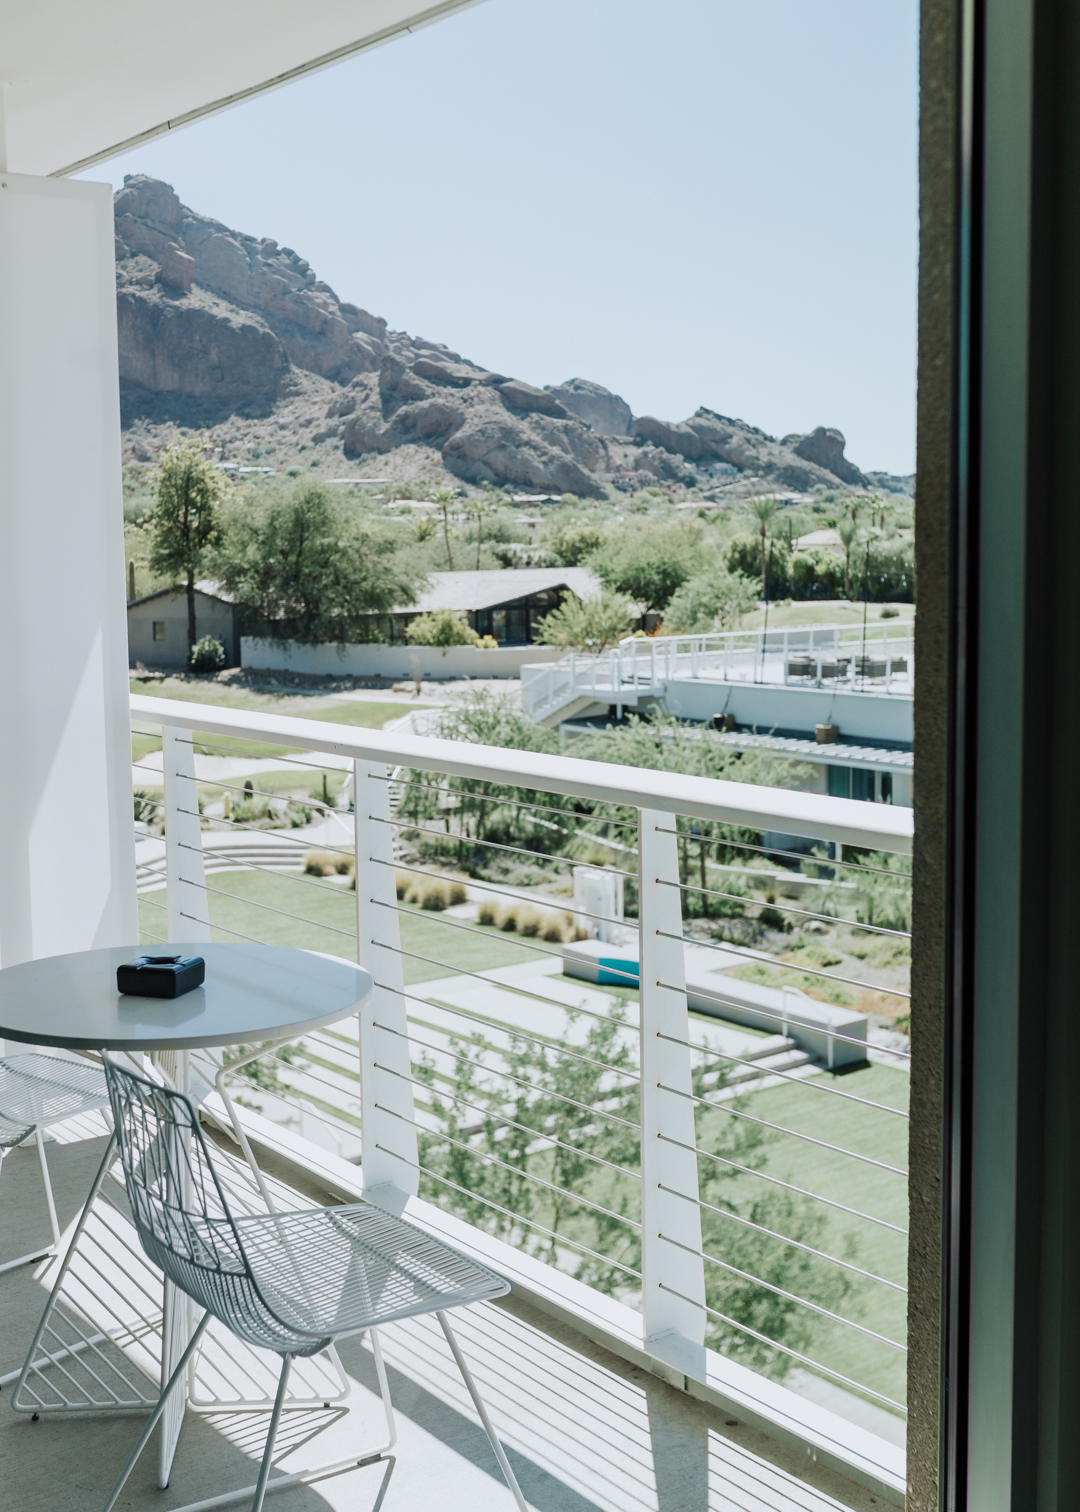 the view from our room of camelback mountain | thedesignedlife.com #mountainshadowsresort #camelbackmountain #wanderlust #tracel